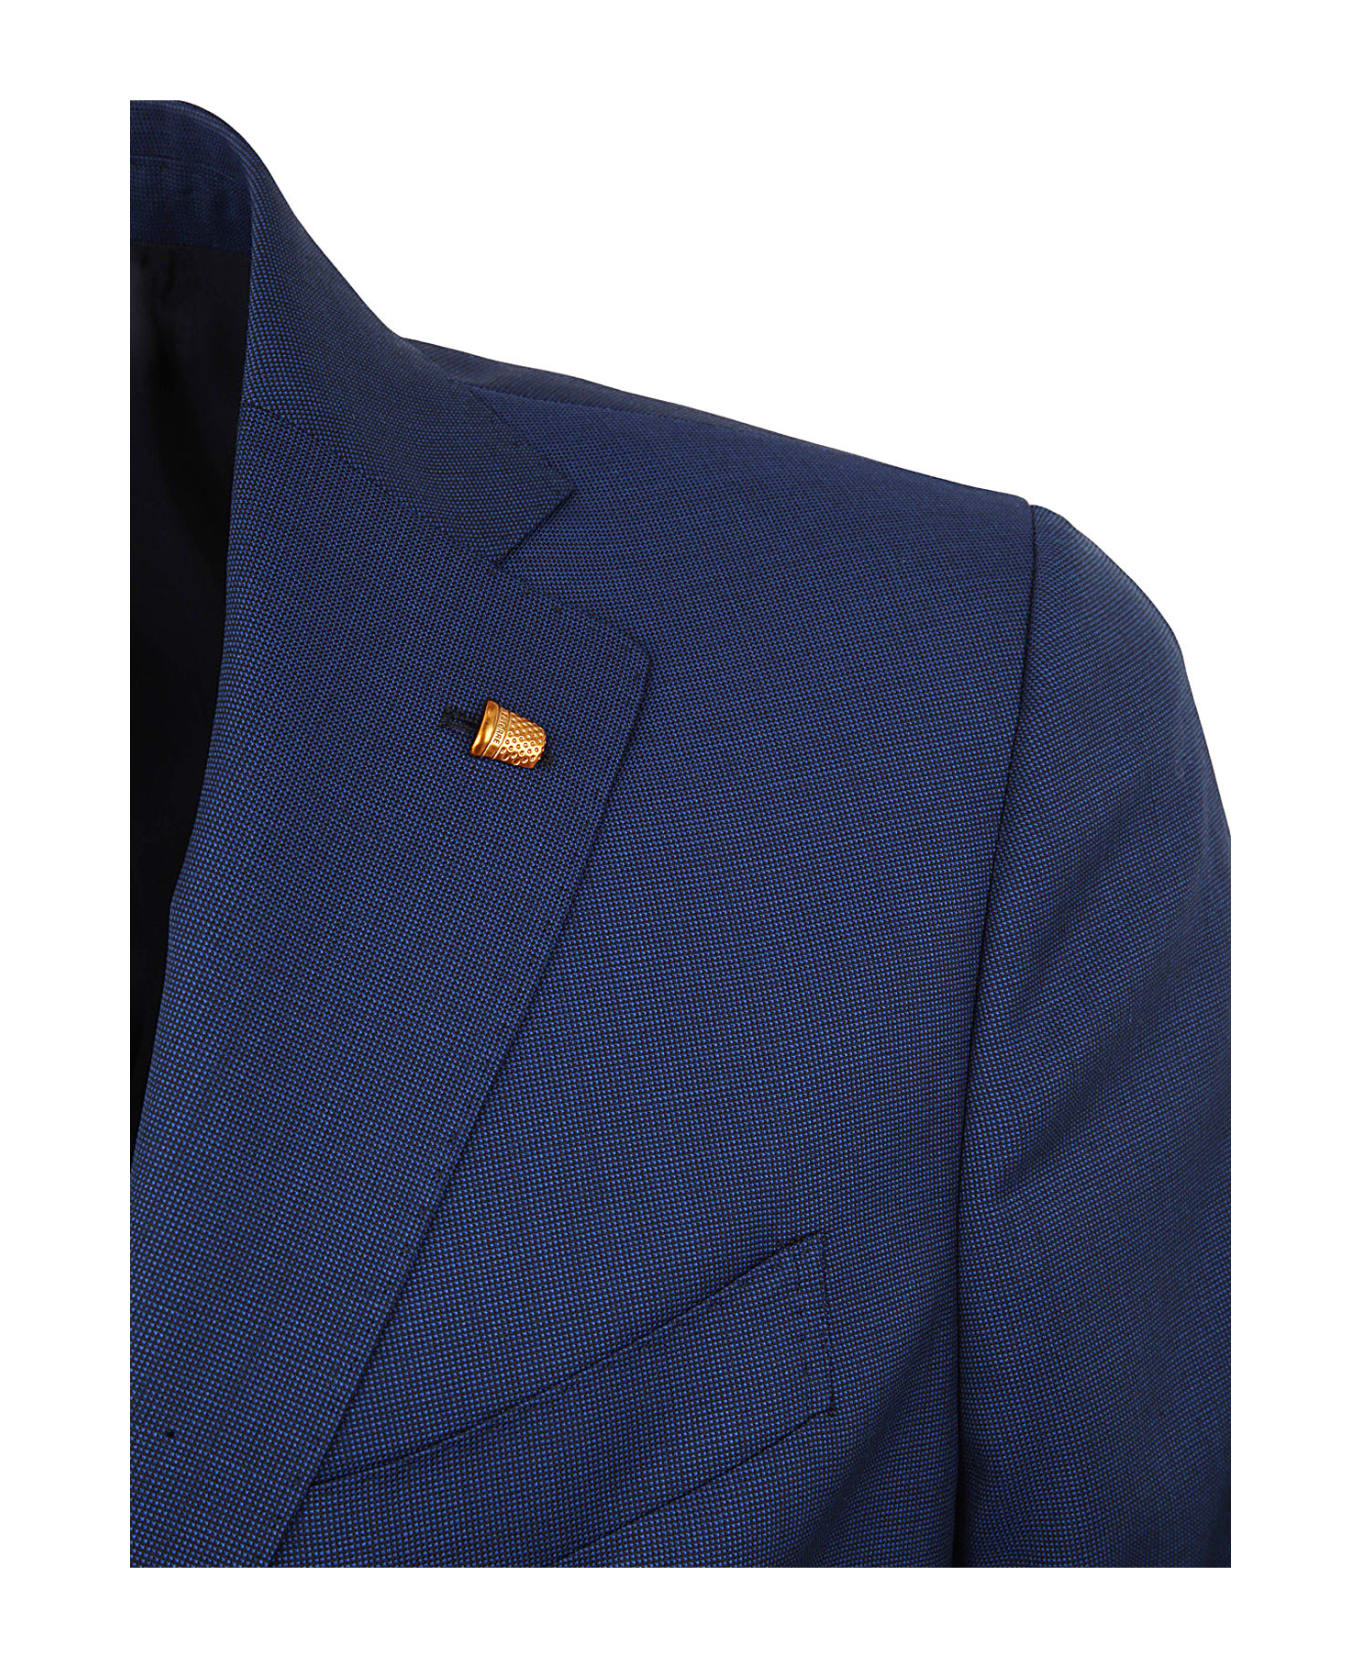 Sartoria Latorre Wool Suit With Two Buttons - Blue スーツ